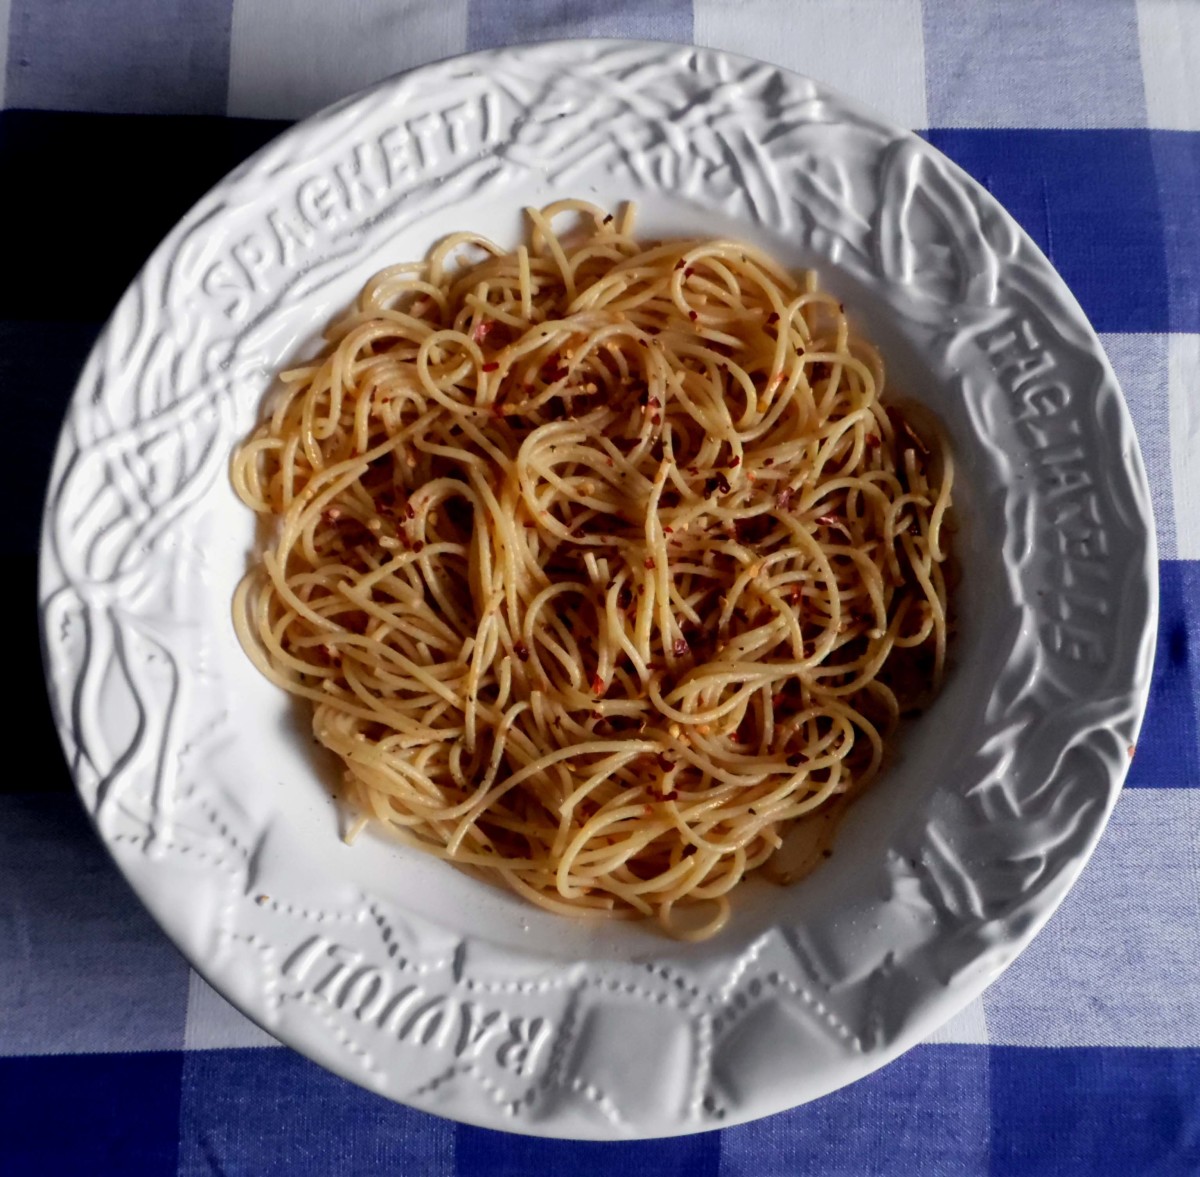 Spaghetti with oil, chilli and garlic: a simple yet classic sauce